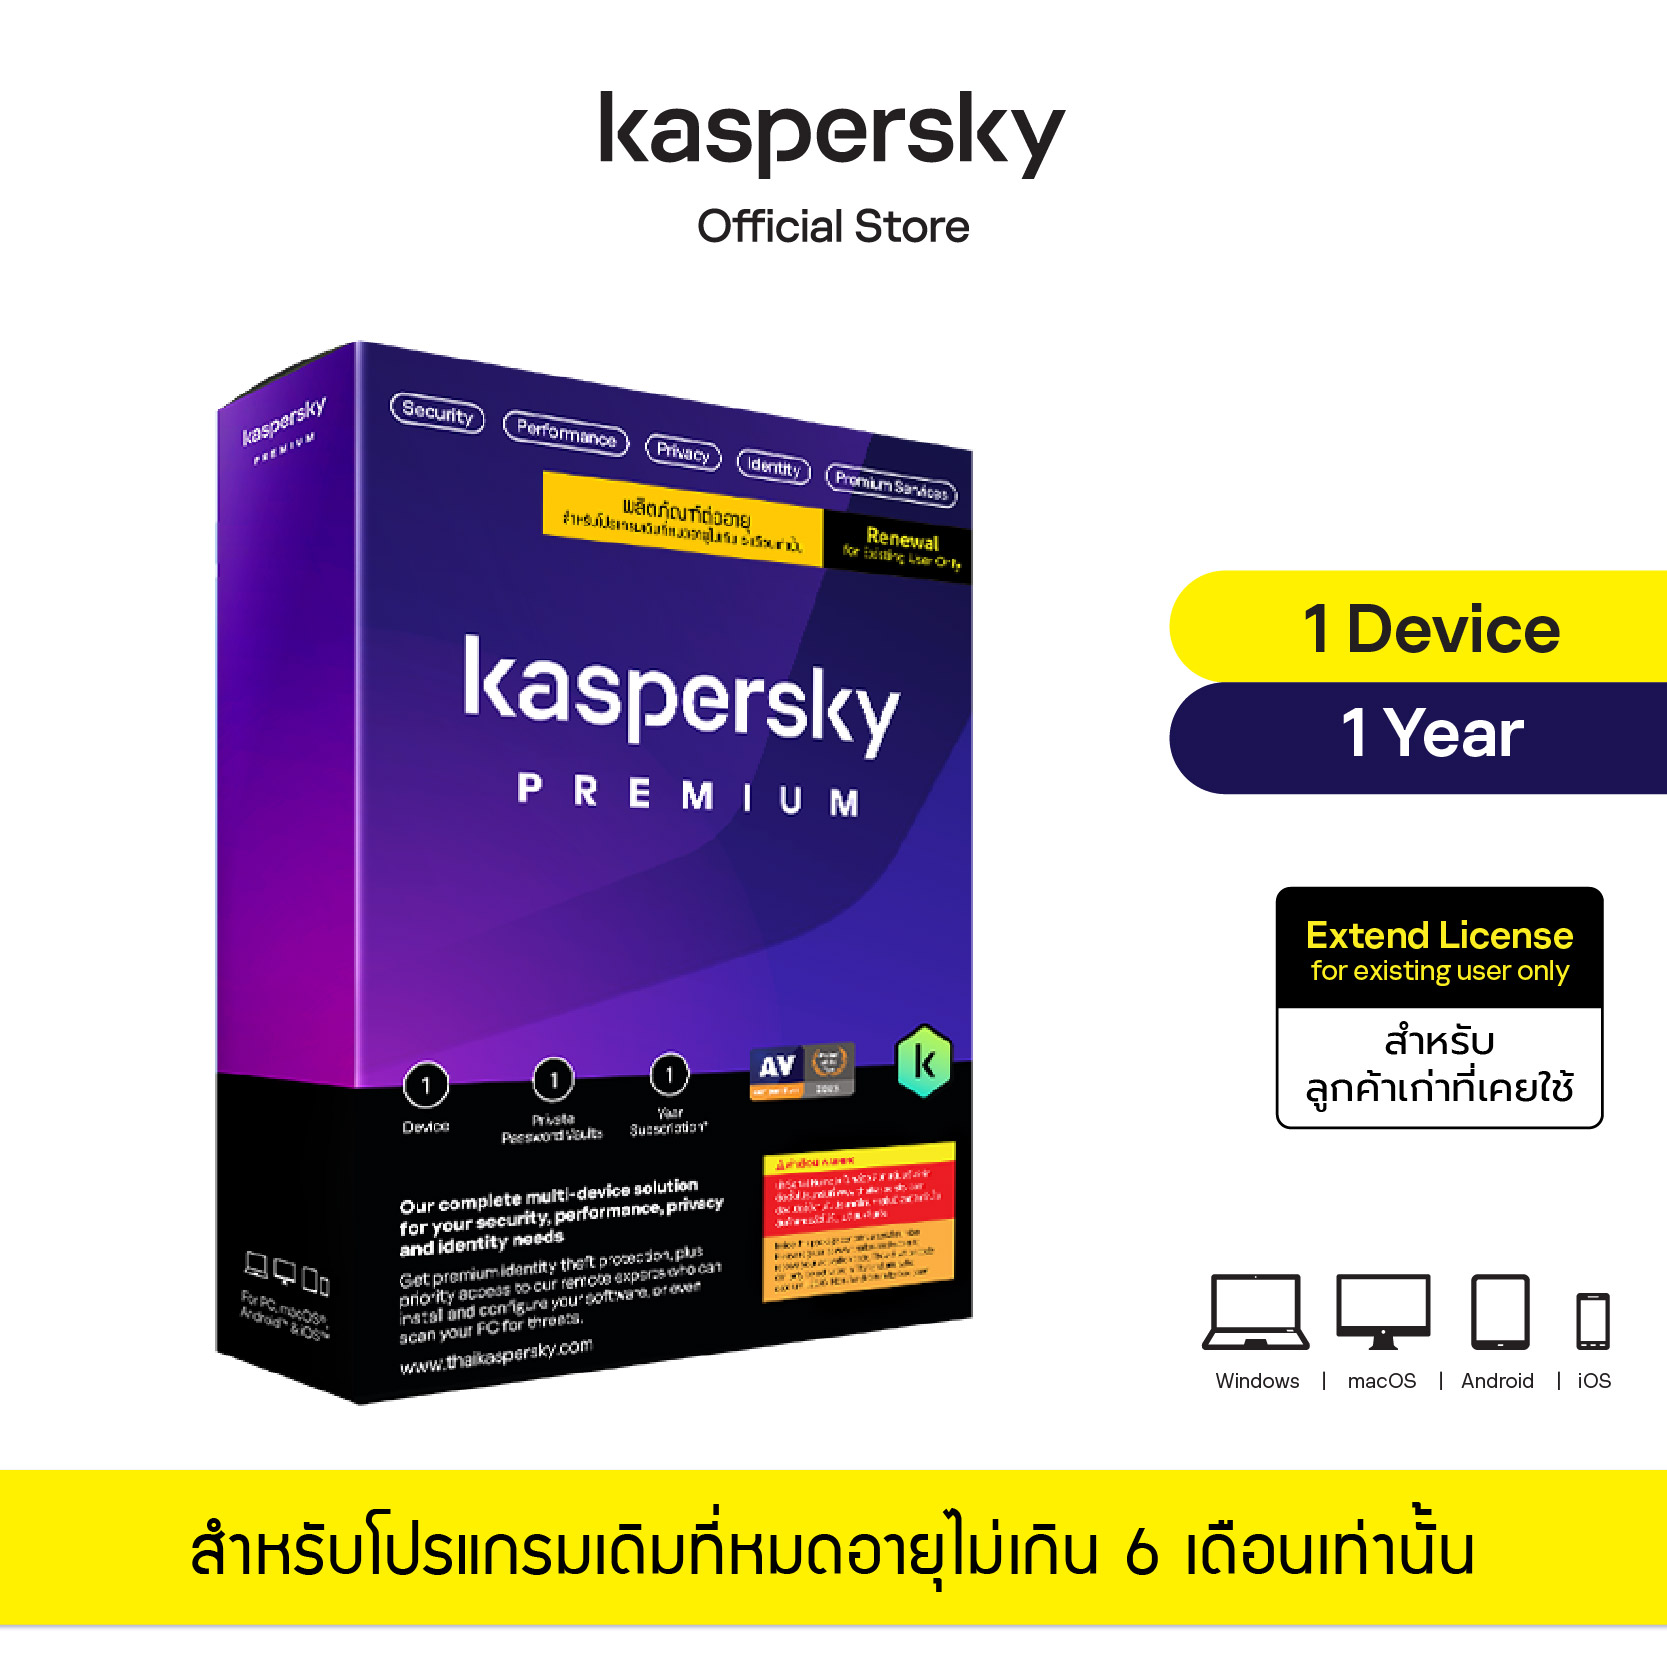 Kaspersky Premium 1 Device 1 Year (Extend License)